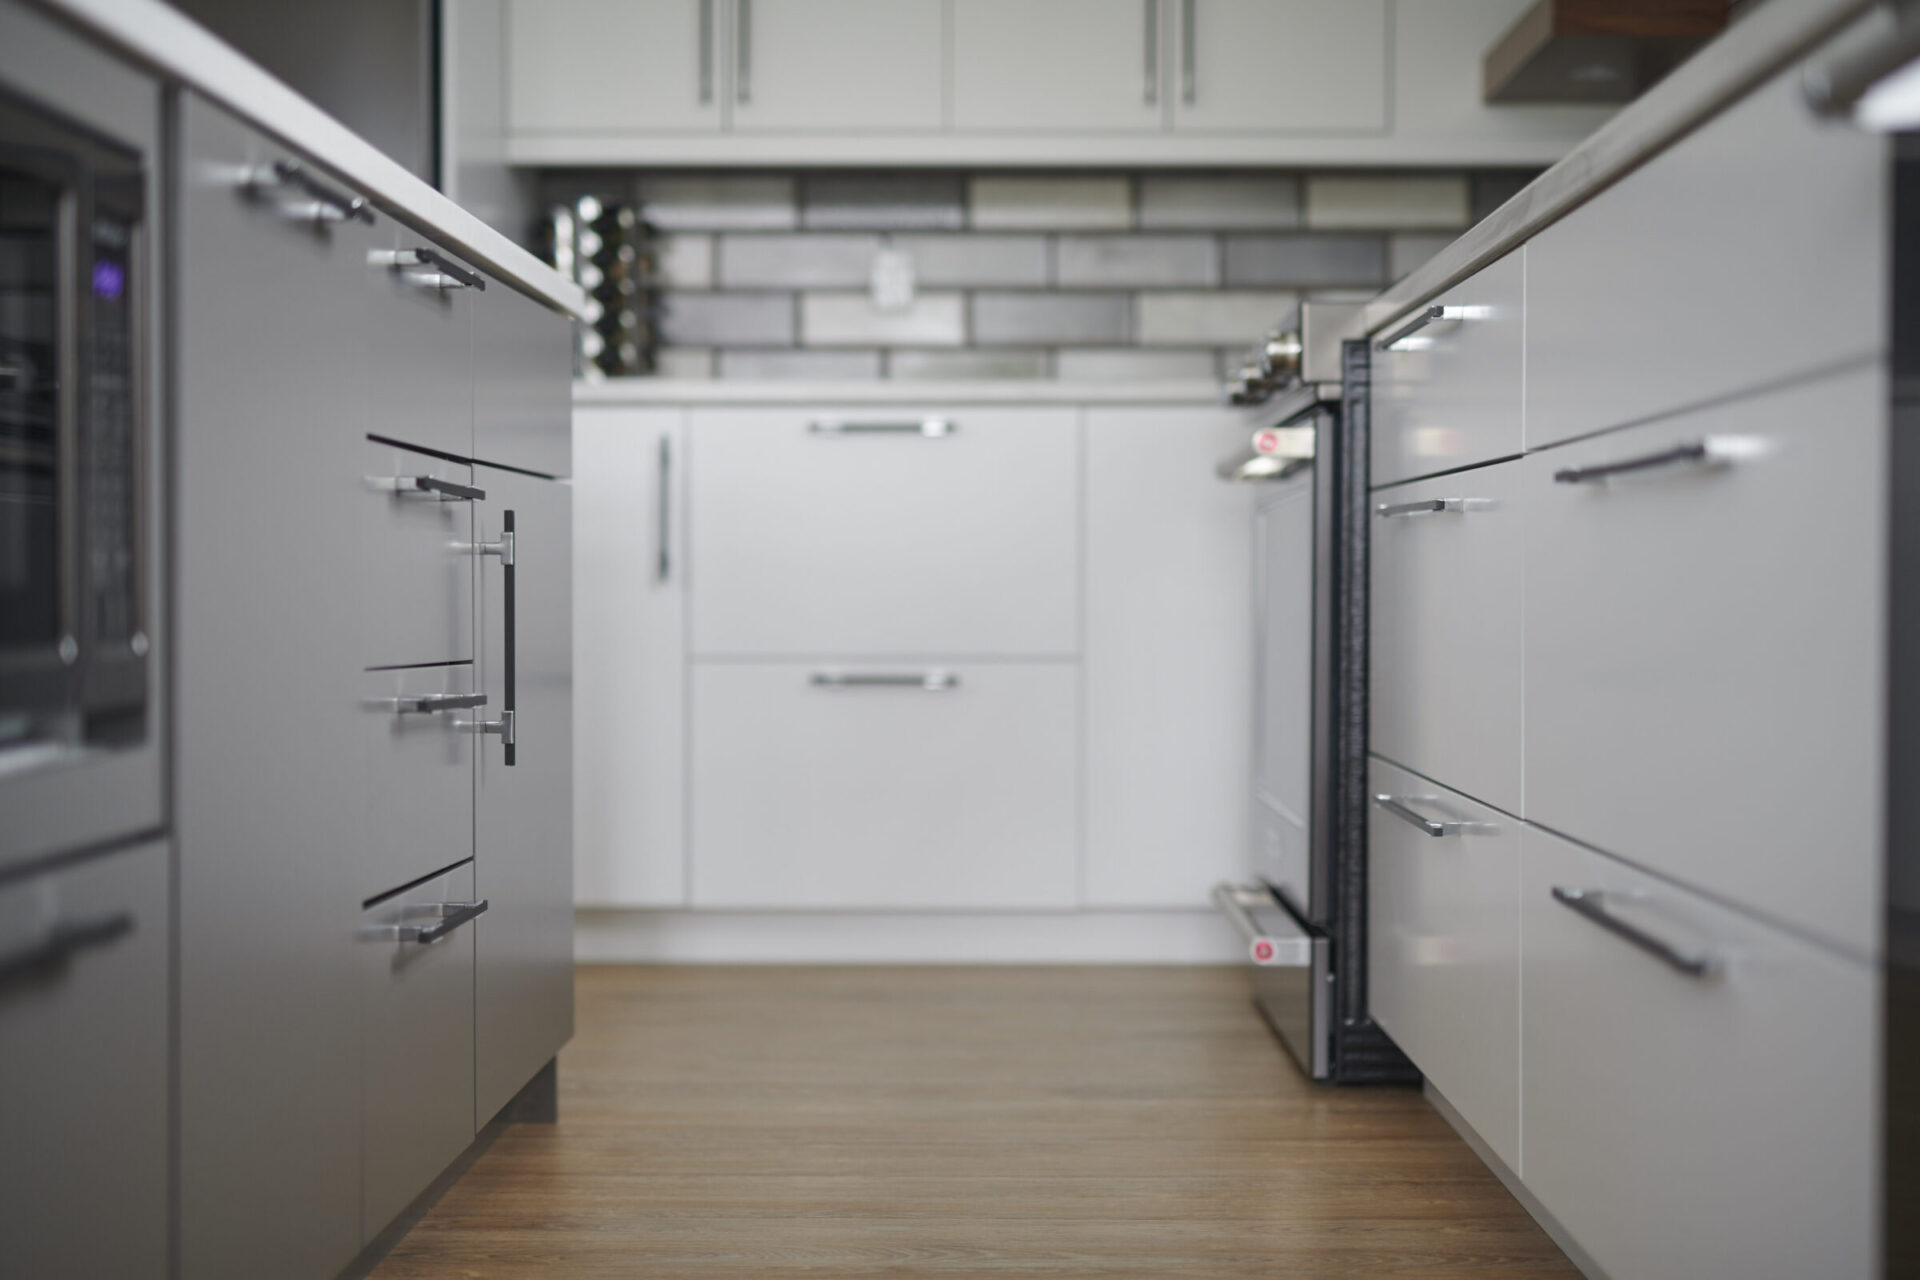 A modern kitchen interior with white cabinetry, gray countertops, stainless steel handles, subway tile backsplash, and wood flooring, taken with a shallow depth of field.